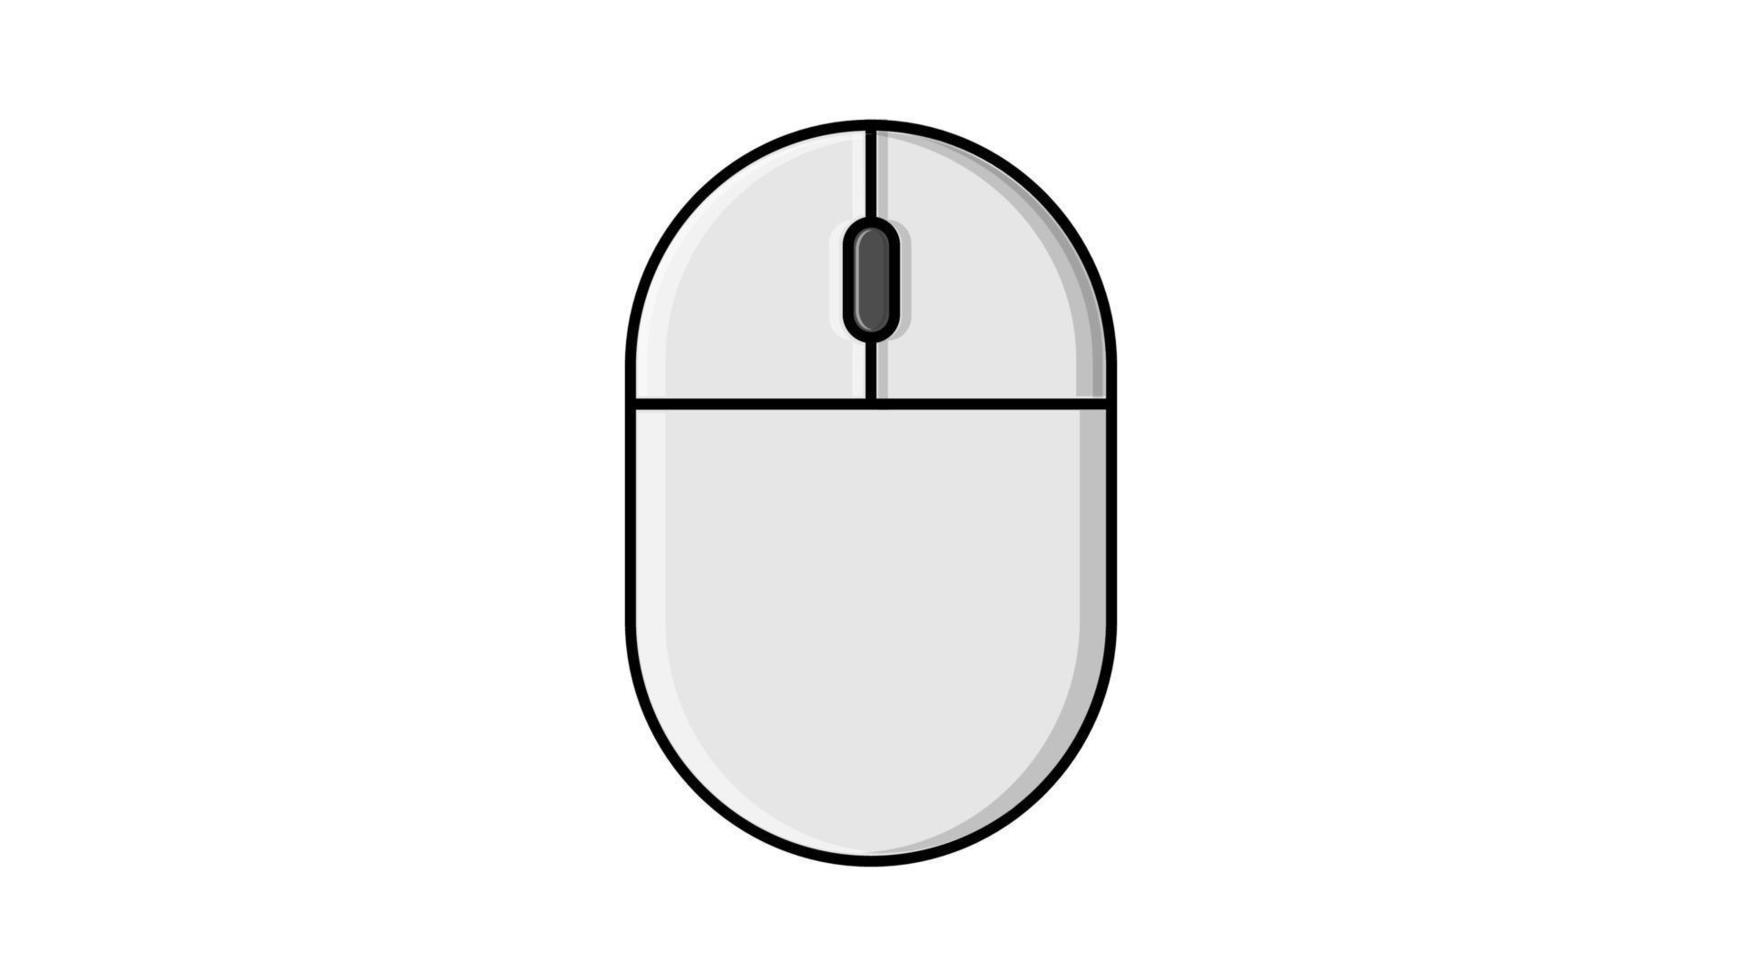 Vector illustration of a linear white flat icon of a digital wireless computer mouse with buttons and wheel on a white background with a black stroke. Concept computer digital technologies